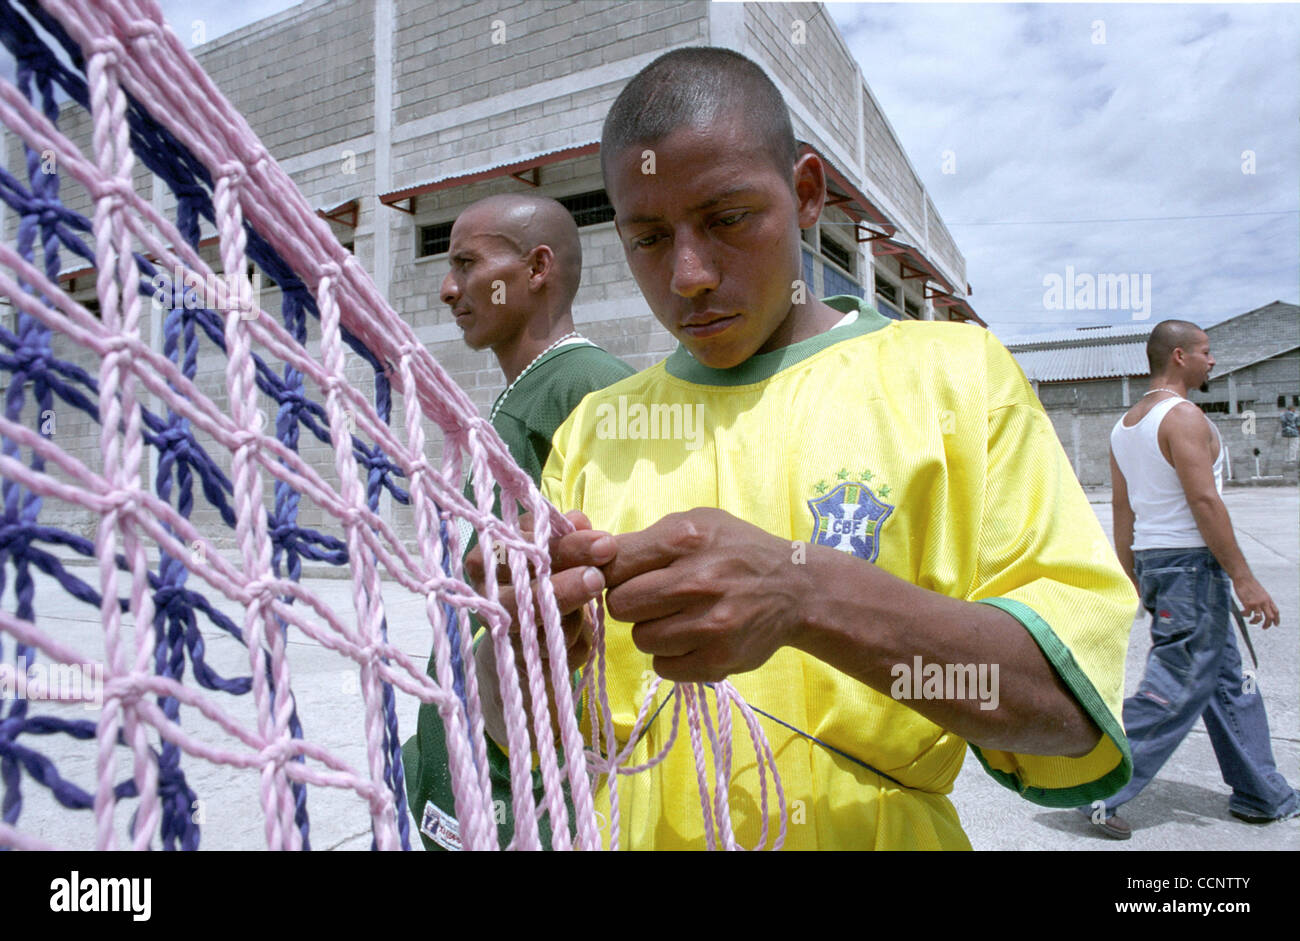 Carlos, 23, weaves yarn into fabric bags in a cellblock at a federal penitenciary near Tegucigalpa, Honduras. Carlos and fellow 18th Street gang members earn money by giving the bags to relatives to sell outside the prison.  Photographer:  Luis J. Jimenez City: Tegucigalpa Country: Honduras Date: Ju Stock Photo